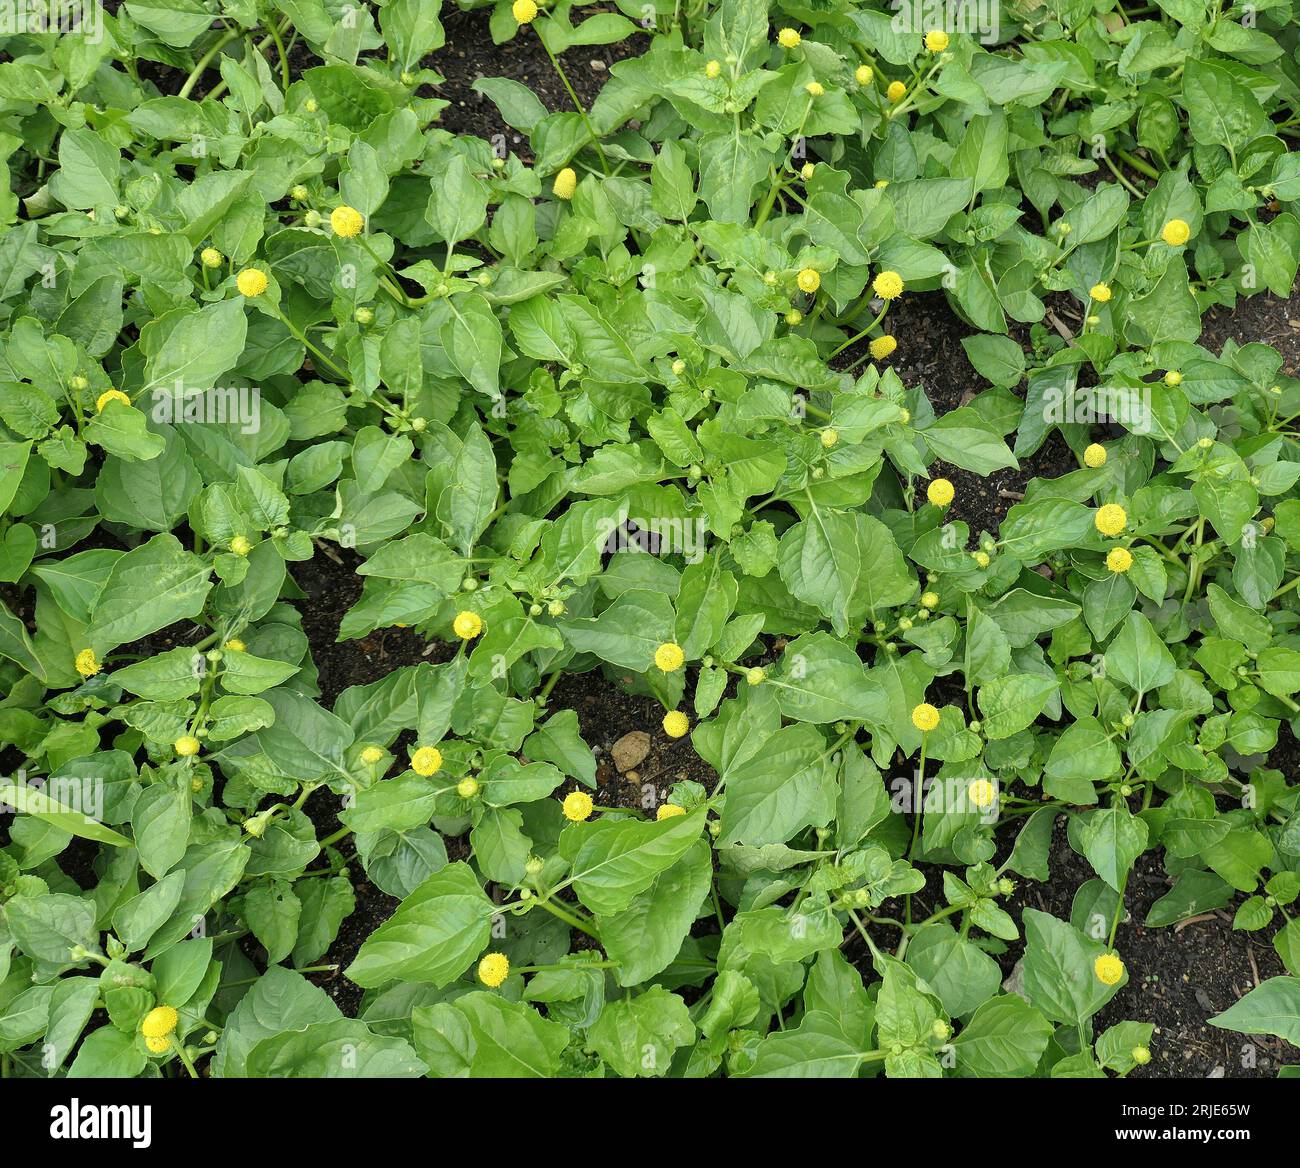 Closeup of the yellow flowers and green leaves of the culinary herb acmella oleracea. Stock Photo